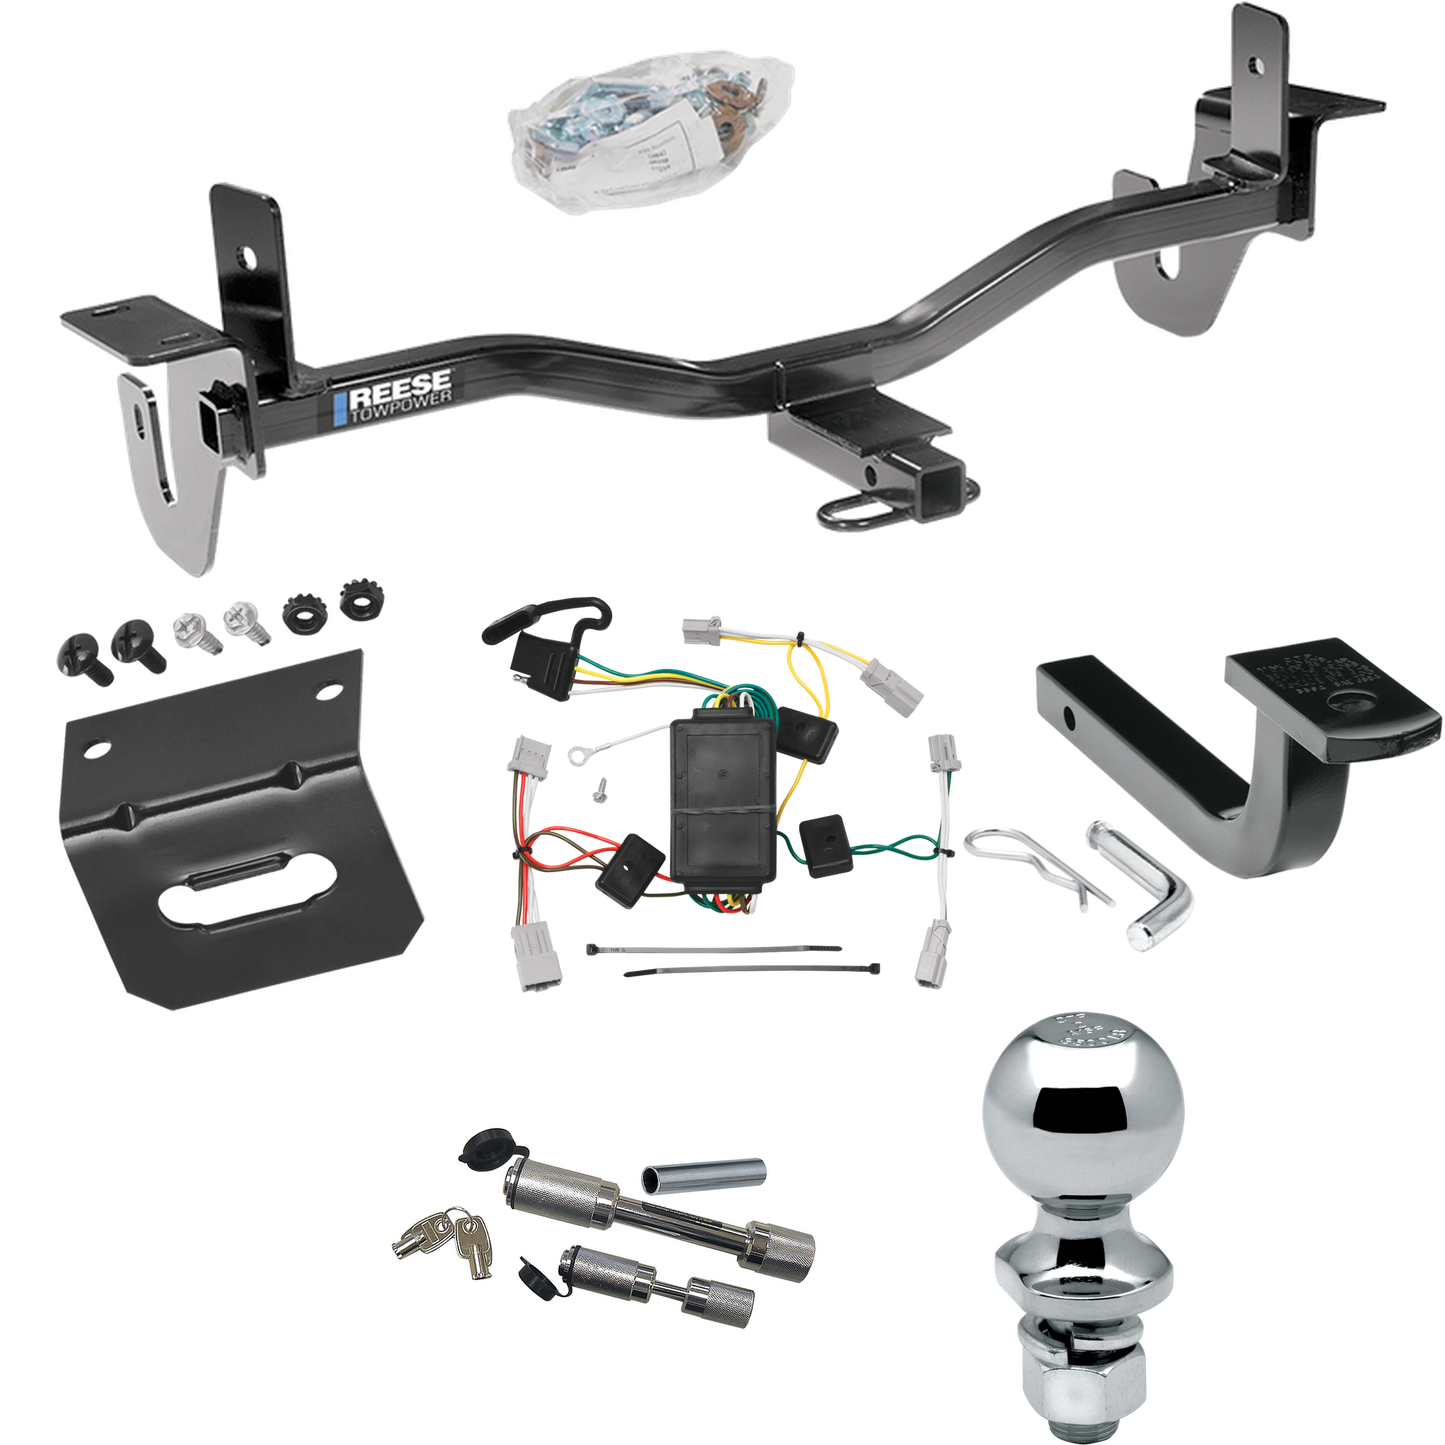 Fits 2010-2013 Mazda 3 Trailer Hitch Tow PKG w/ 4-Flat Wiring Harness + Draw-Bar + 2" Ball + Wiring Bracket + Dual Hitch & Coupler Locks (For Sedan, Except w/Grand Touring LED Taillights Models) By Reese Towpower